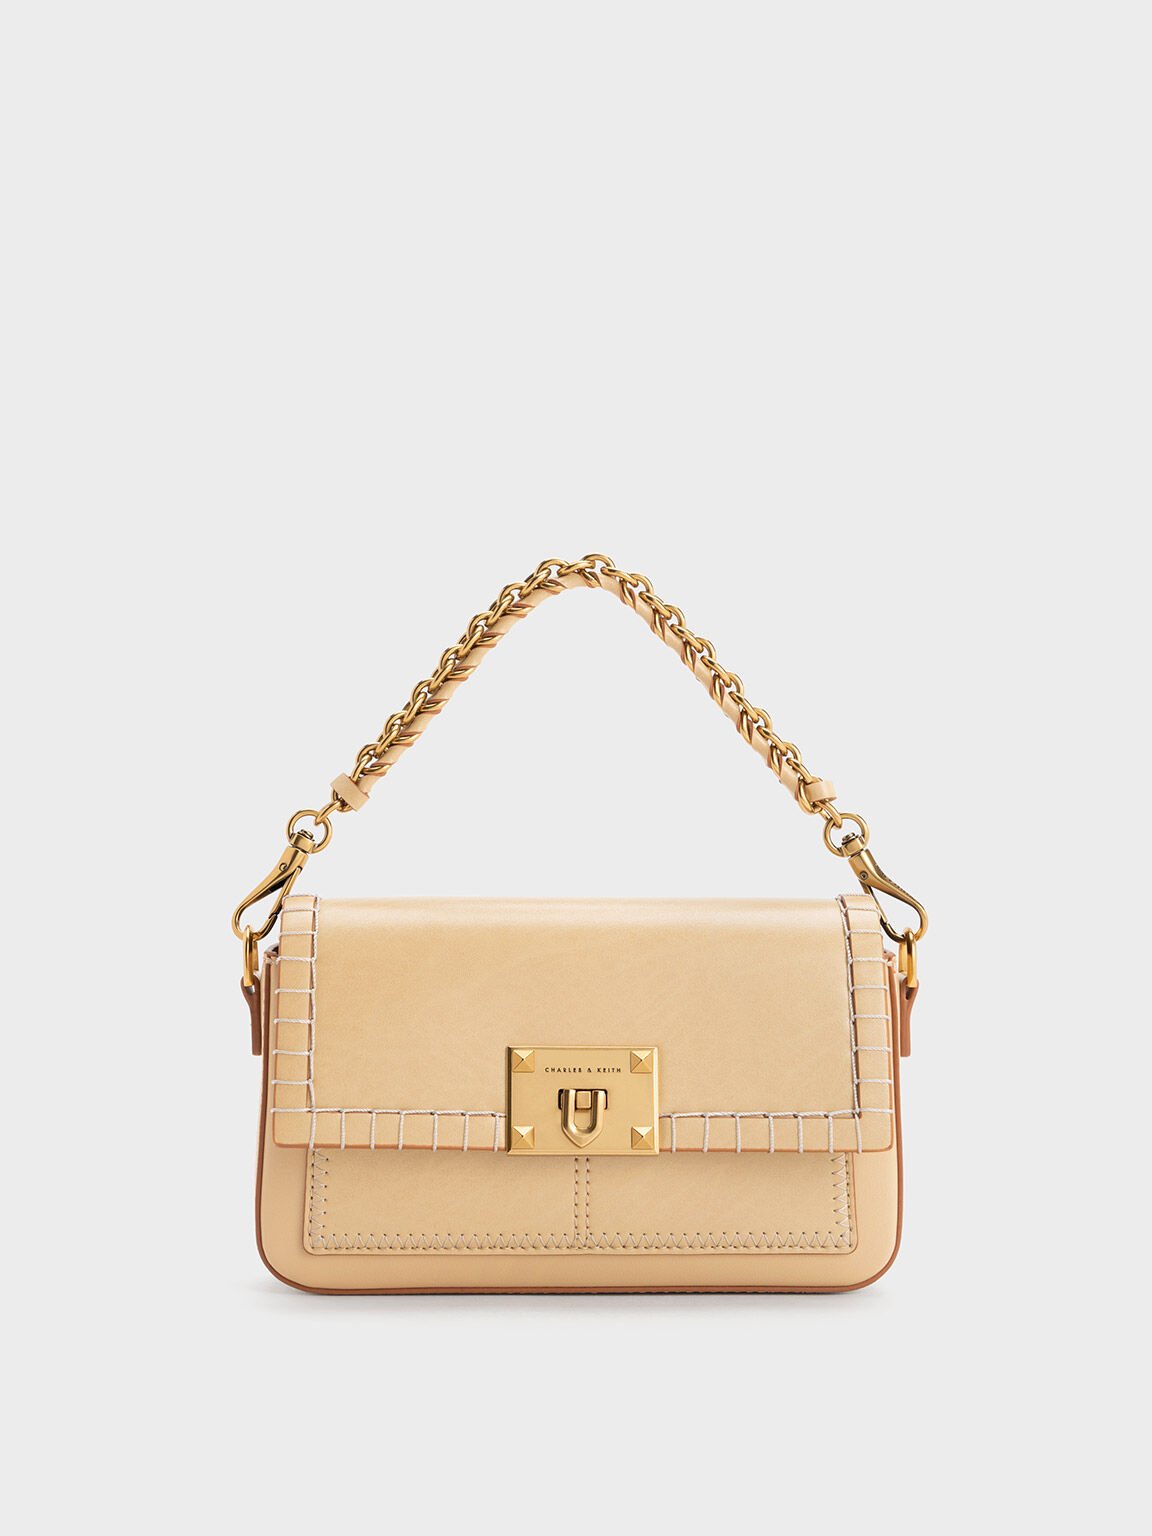 How to get Charles and Keith bags online?